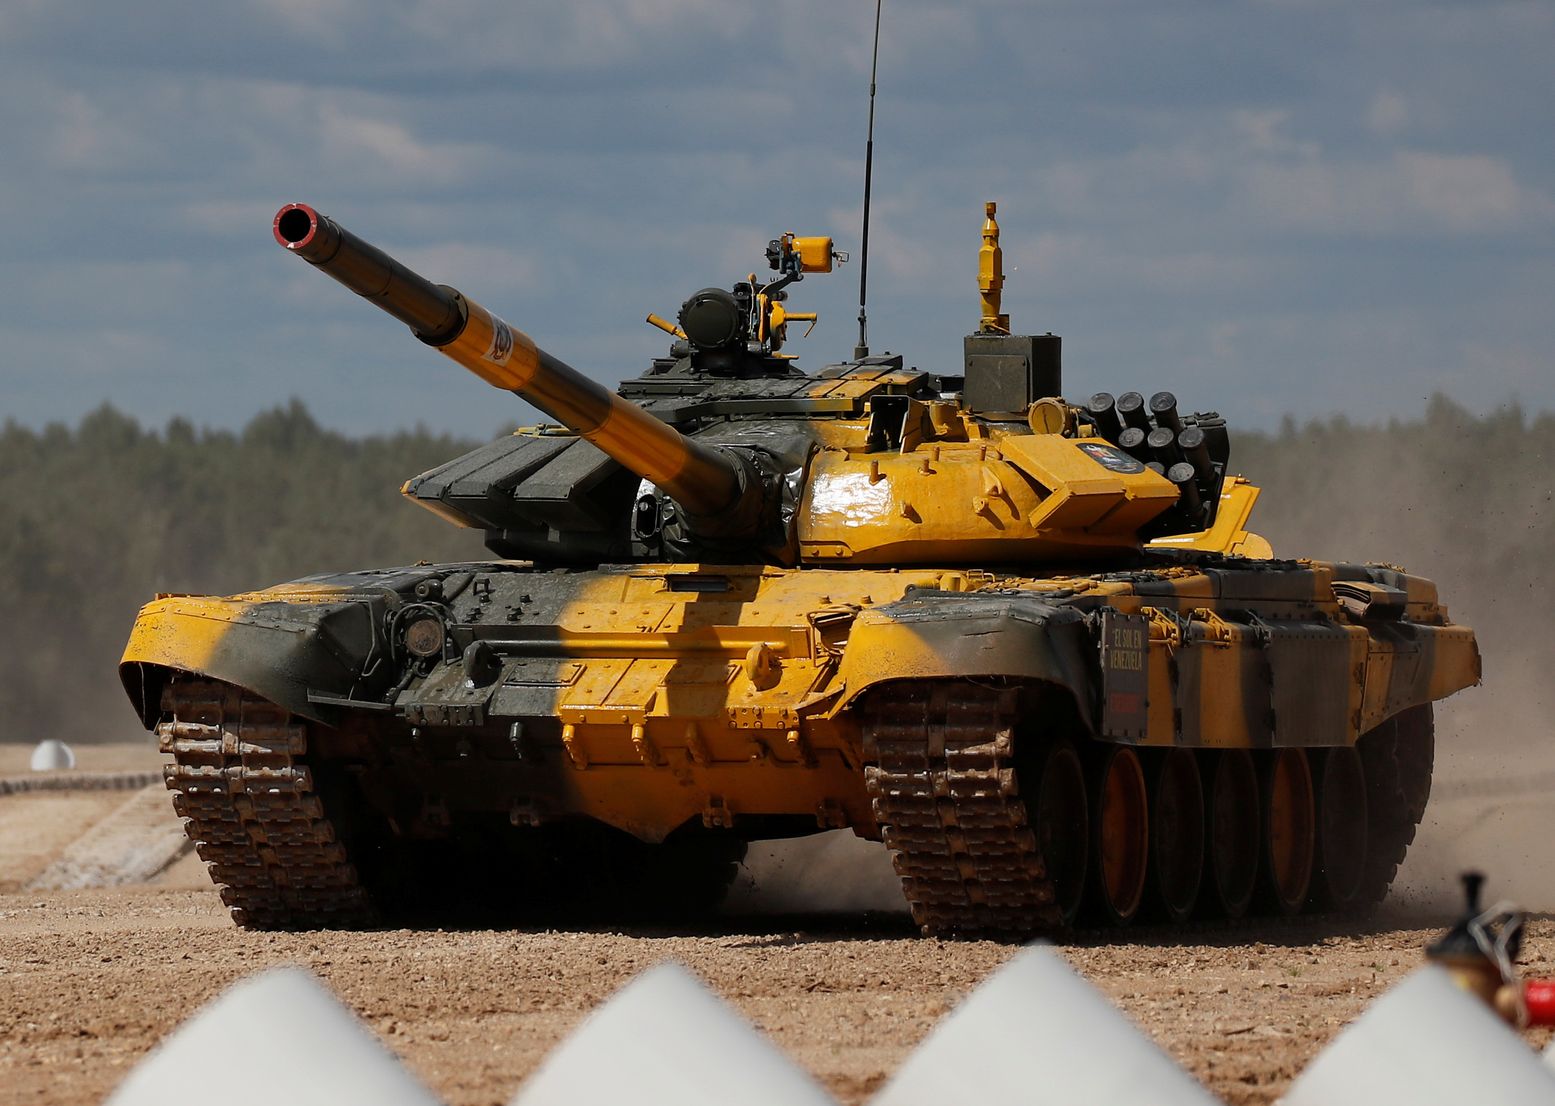 Introducing Russia S New T 72 Tank Thanks To Some Deadly Upgrades The National Interest